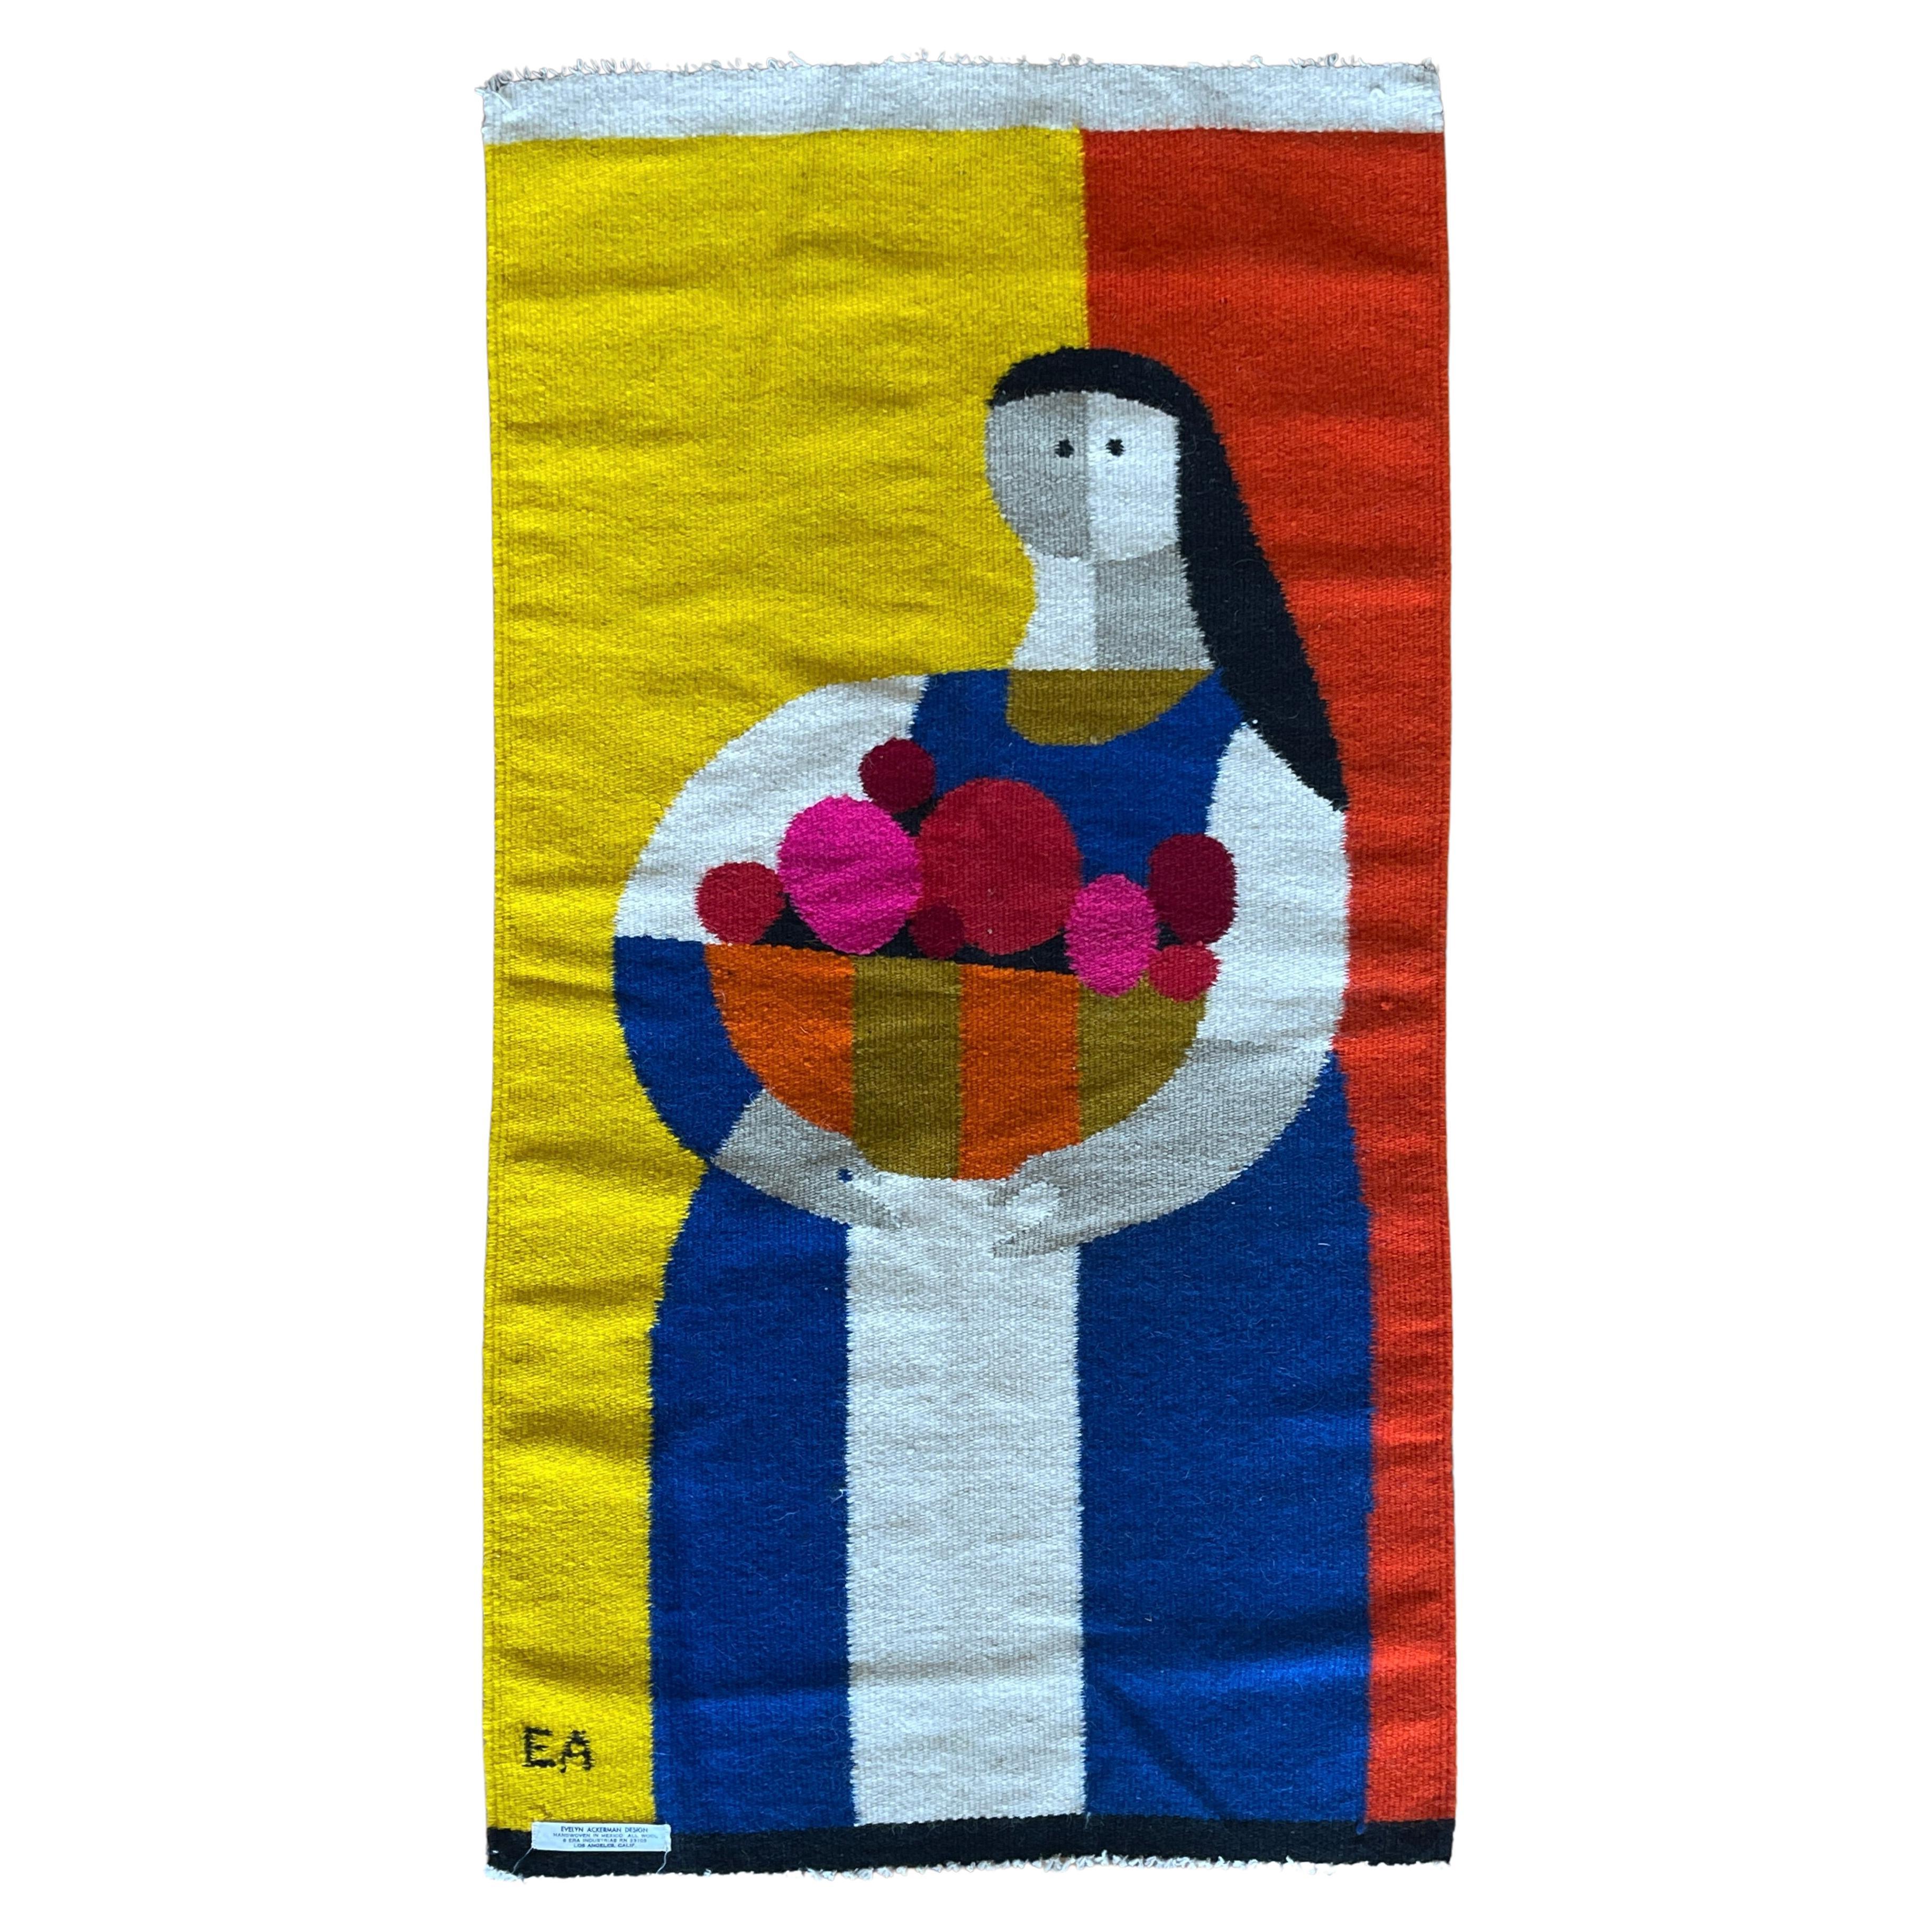 Vibrant original Evelyn Ackerman woven wool tapestry. Colors are rich and vibrant. Corner of tapestry has 